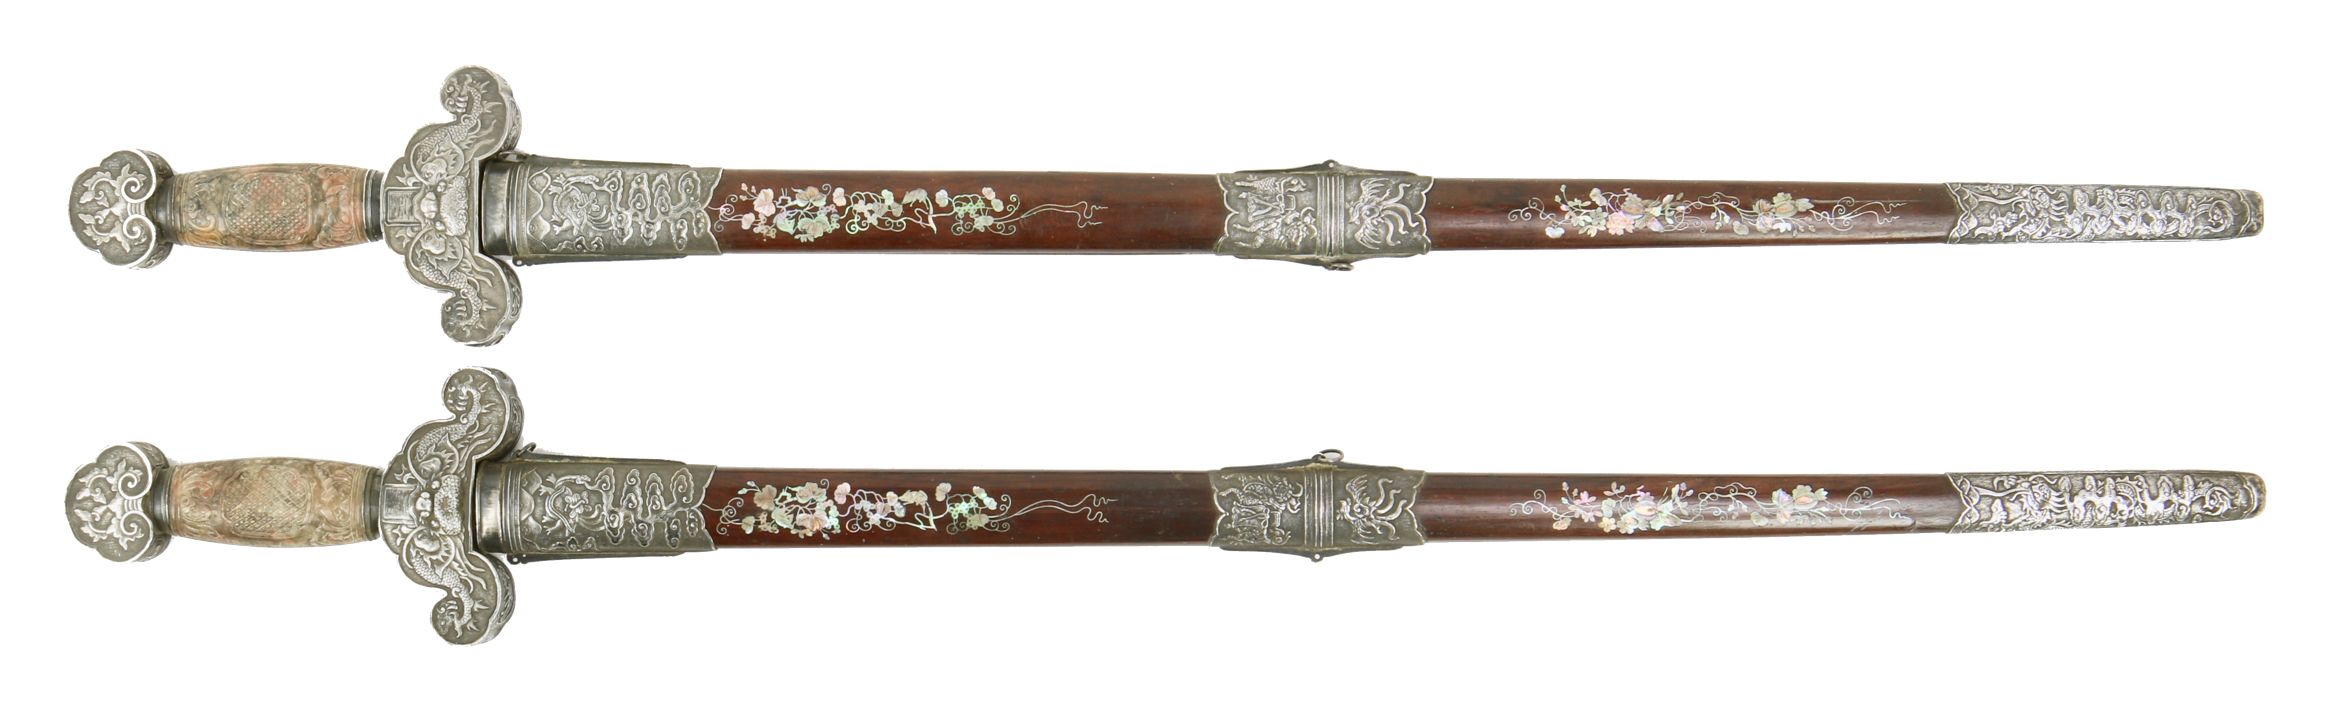 Pair of matched Vietnamese straightswords